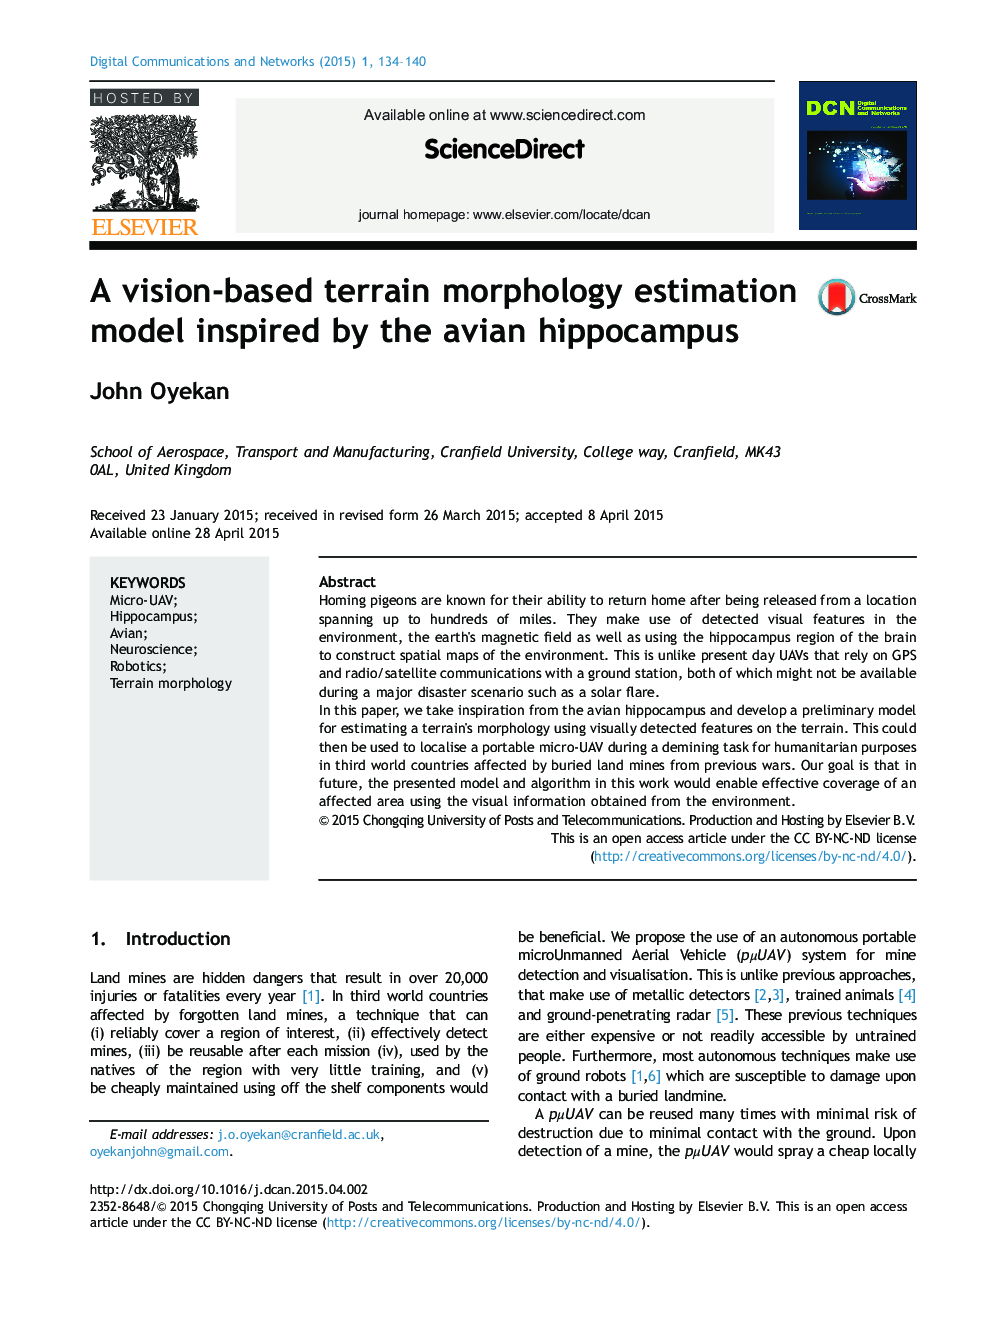 A vision-based terrain morphology estimation model inspired by the avian hippocampus